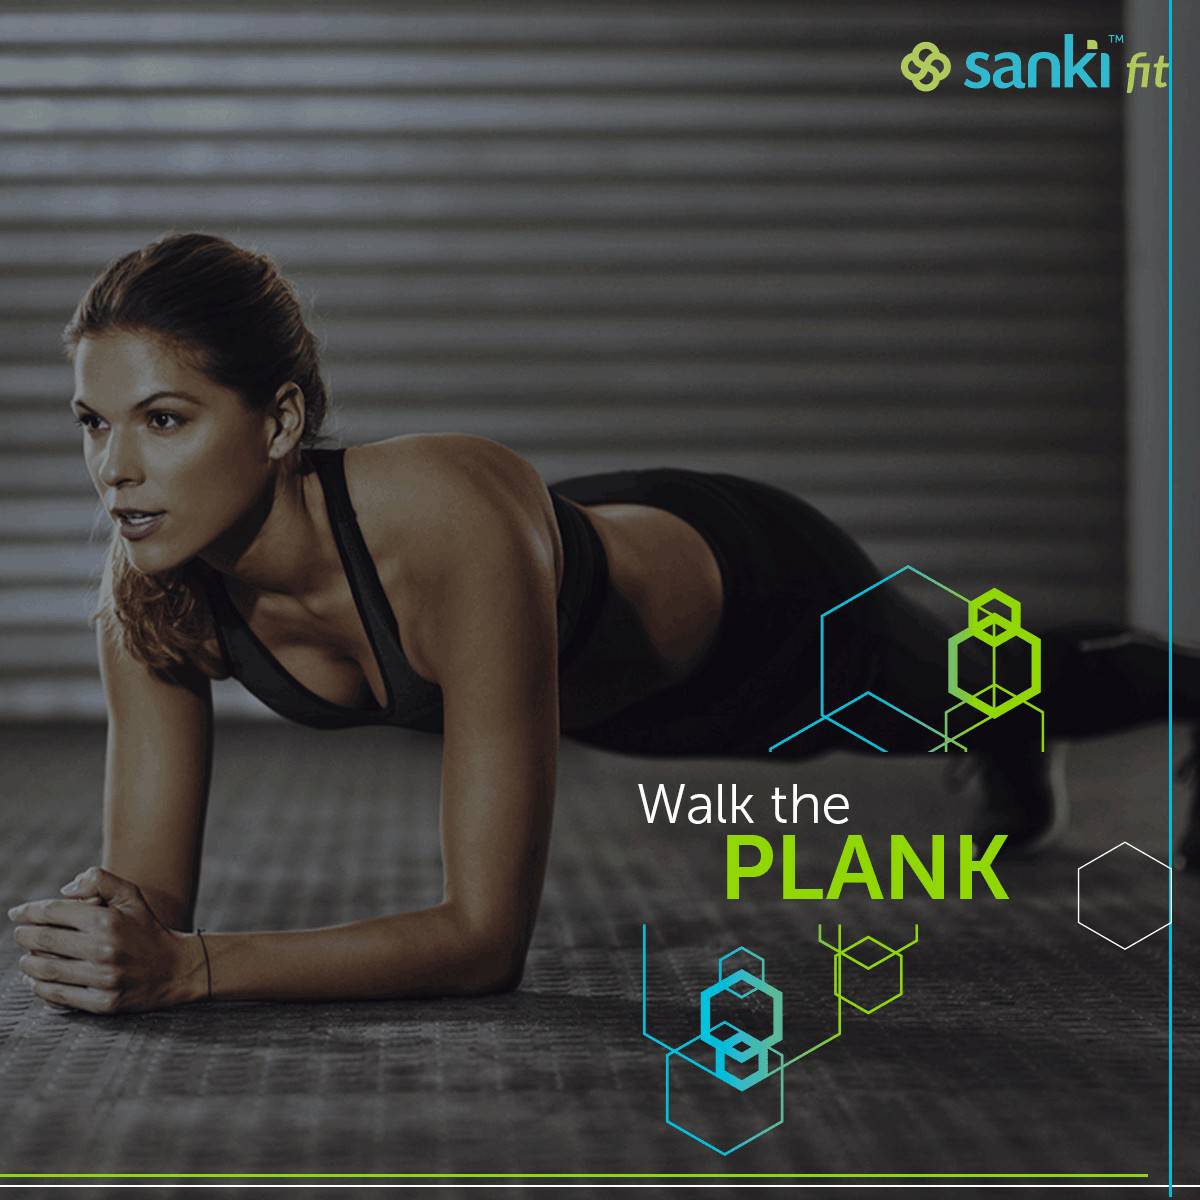 Warm up with 60 seconds of push ups. Plank for 30 seconds. 10 reps of squat jumps. 10 reps of side lunges. 30 seconds of squats. #Sanki #SankiUSA #SankiFit #IntelligentForce #10D #HealthIsWealth #ILiveMyDreams